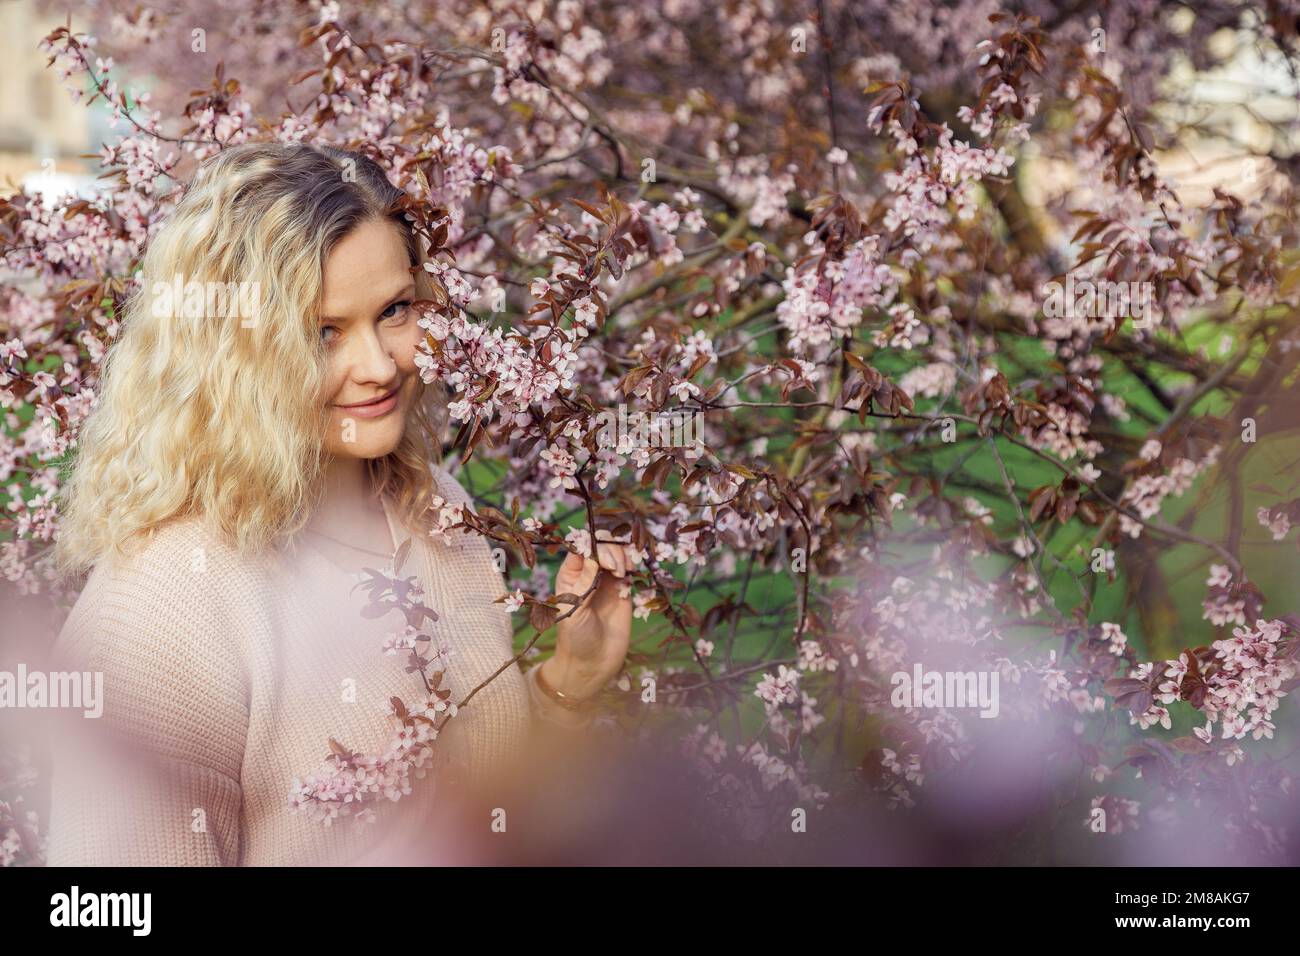 Portrait of young smiling flawless woman with long wavy fair hair wearing pink cardigan, standing near bird-cherry tree. Stock Photo